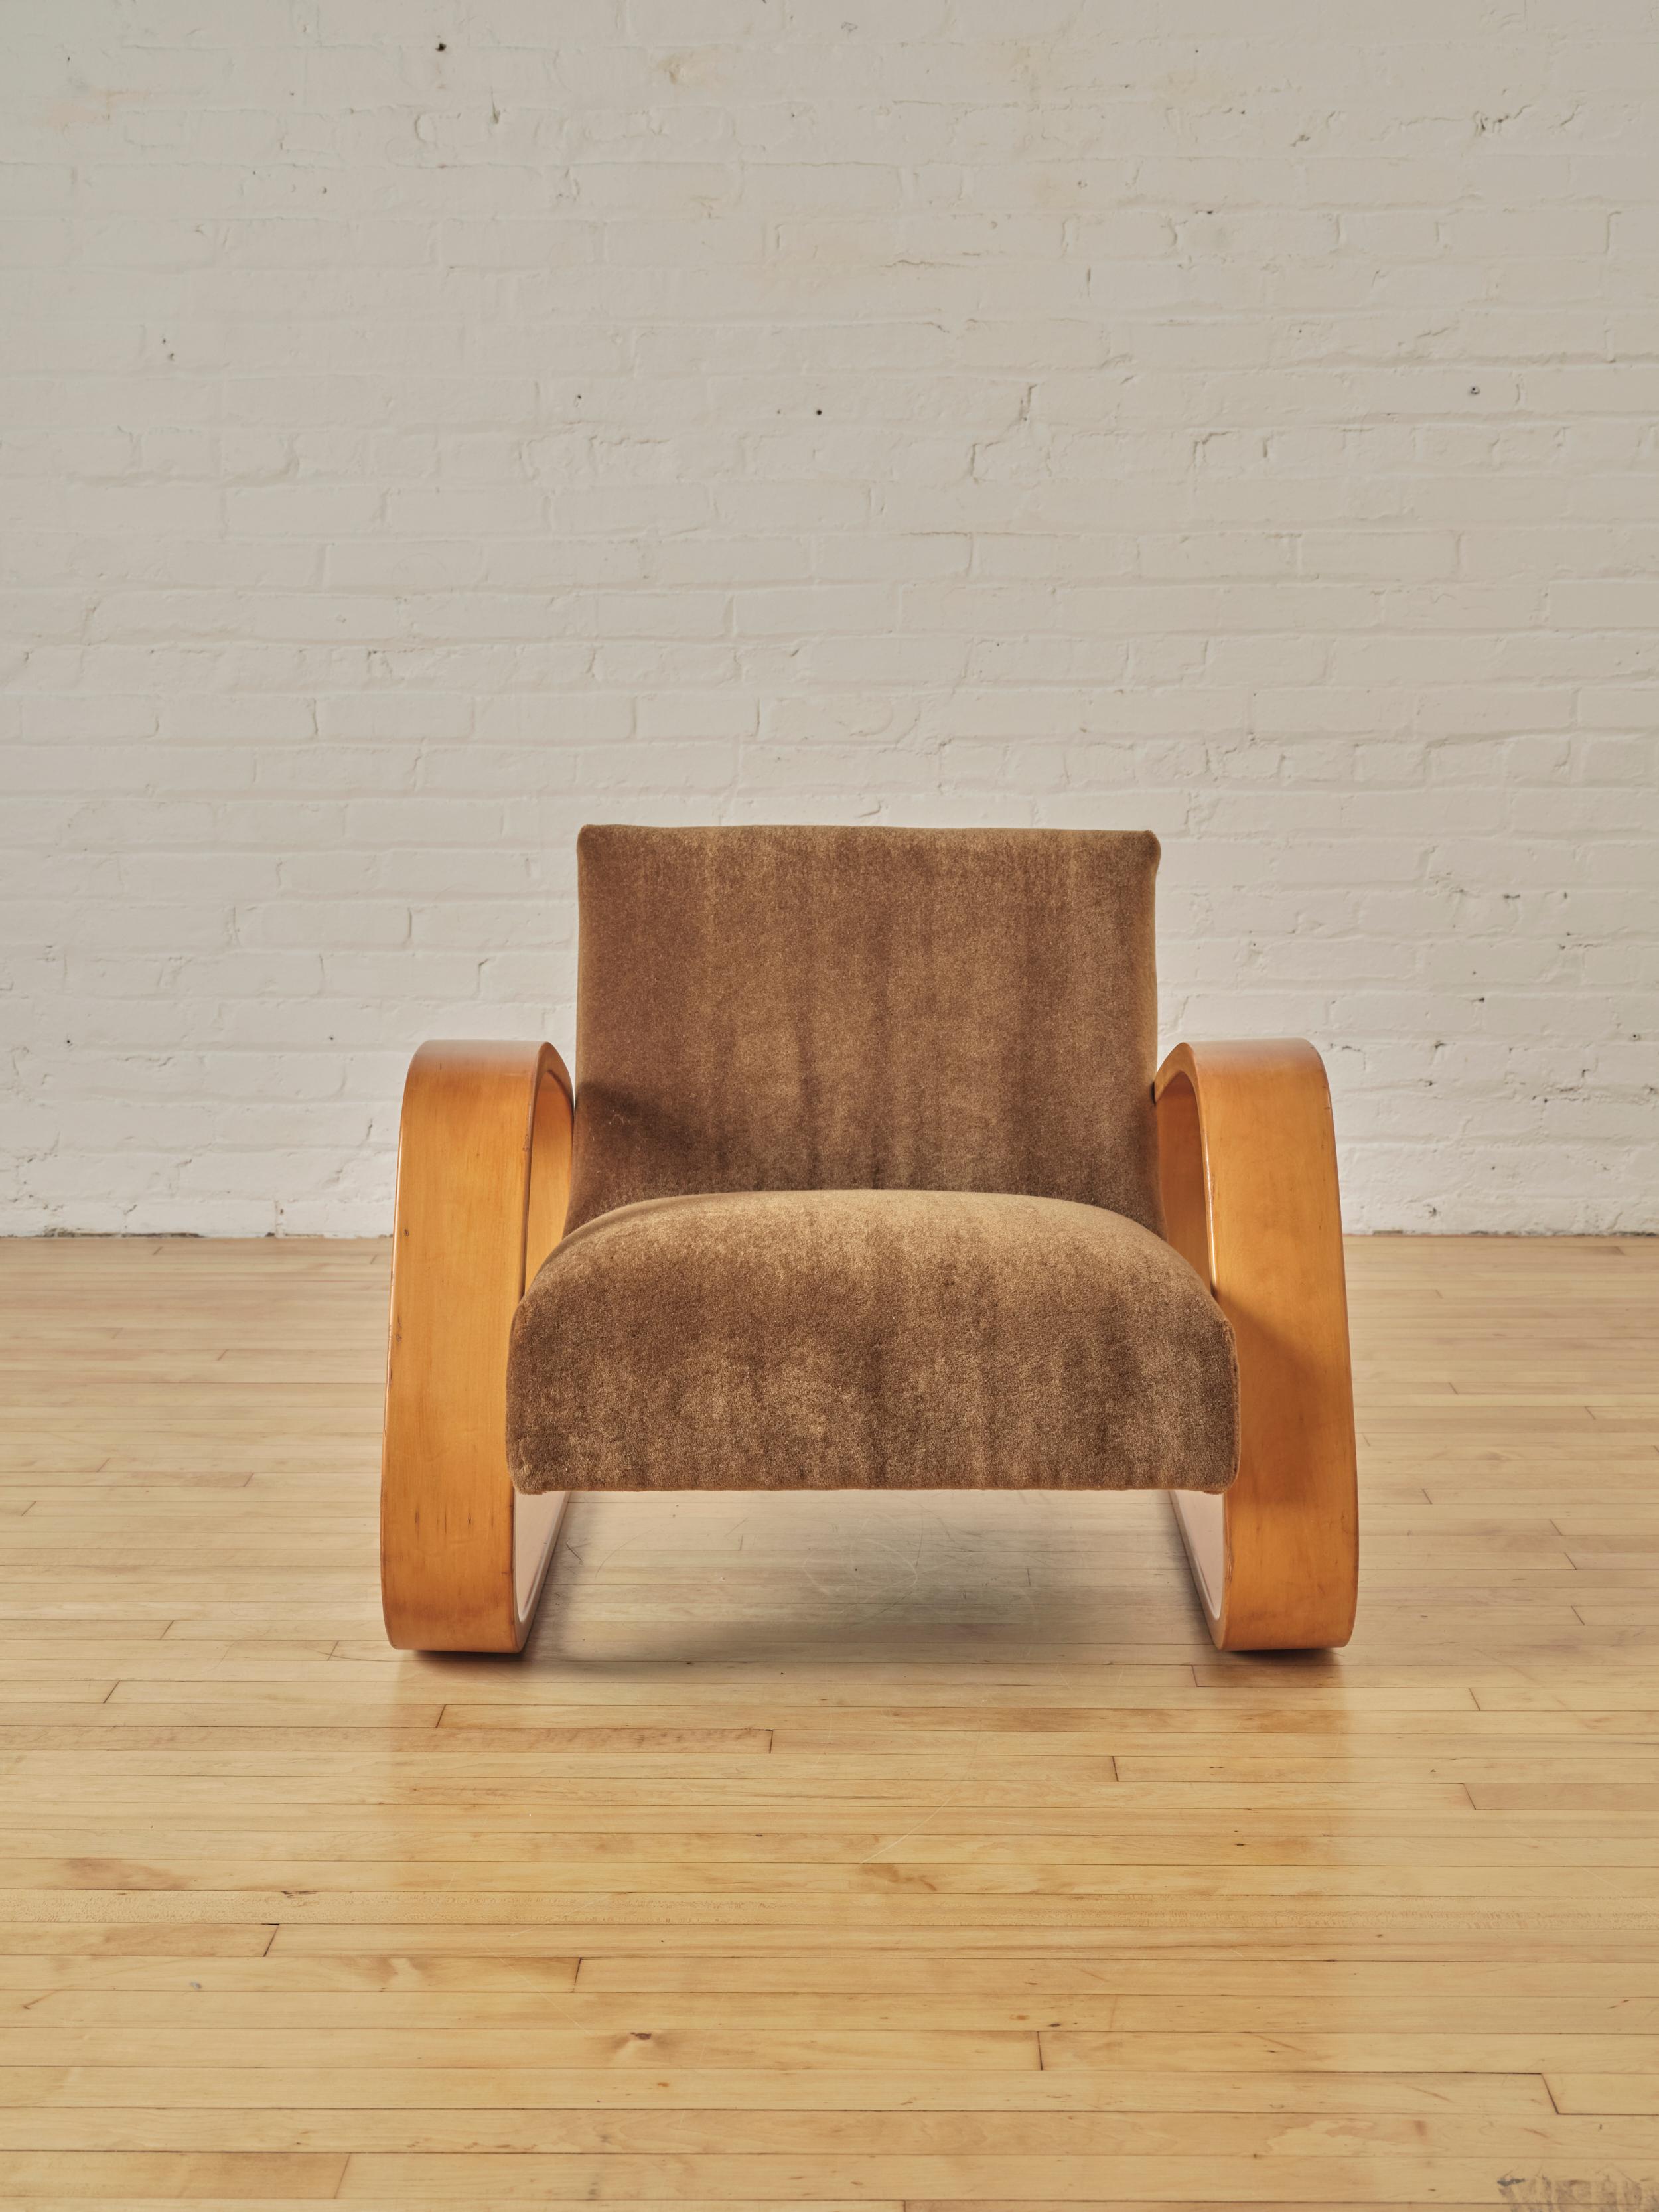 400 Tank Lounge Chair by Alvar Aalto for Artek, crafted in birch plywood with curved armrests. Newly reupholstered in chocolate mohair. Designed in 1936
